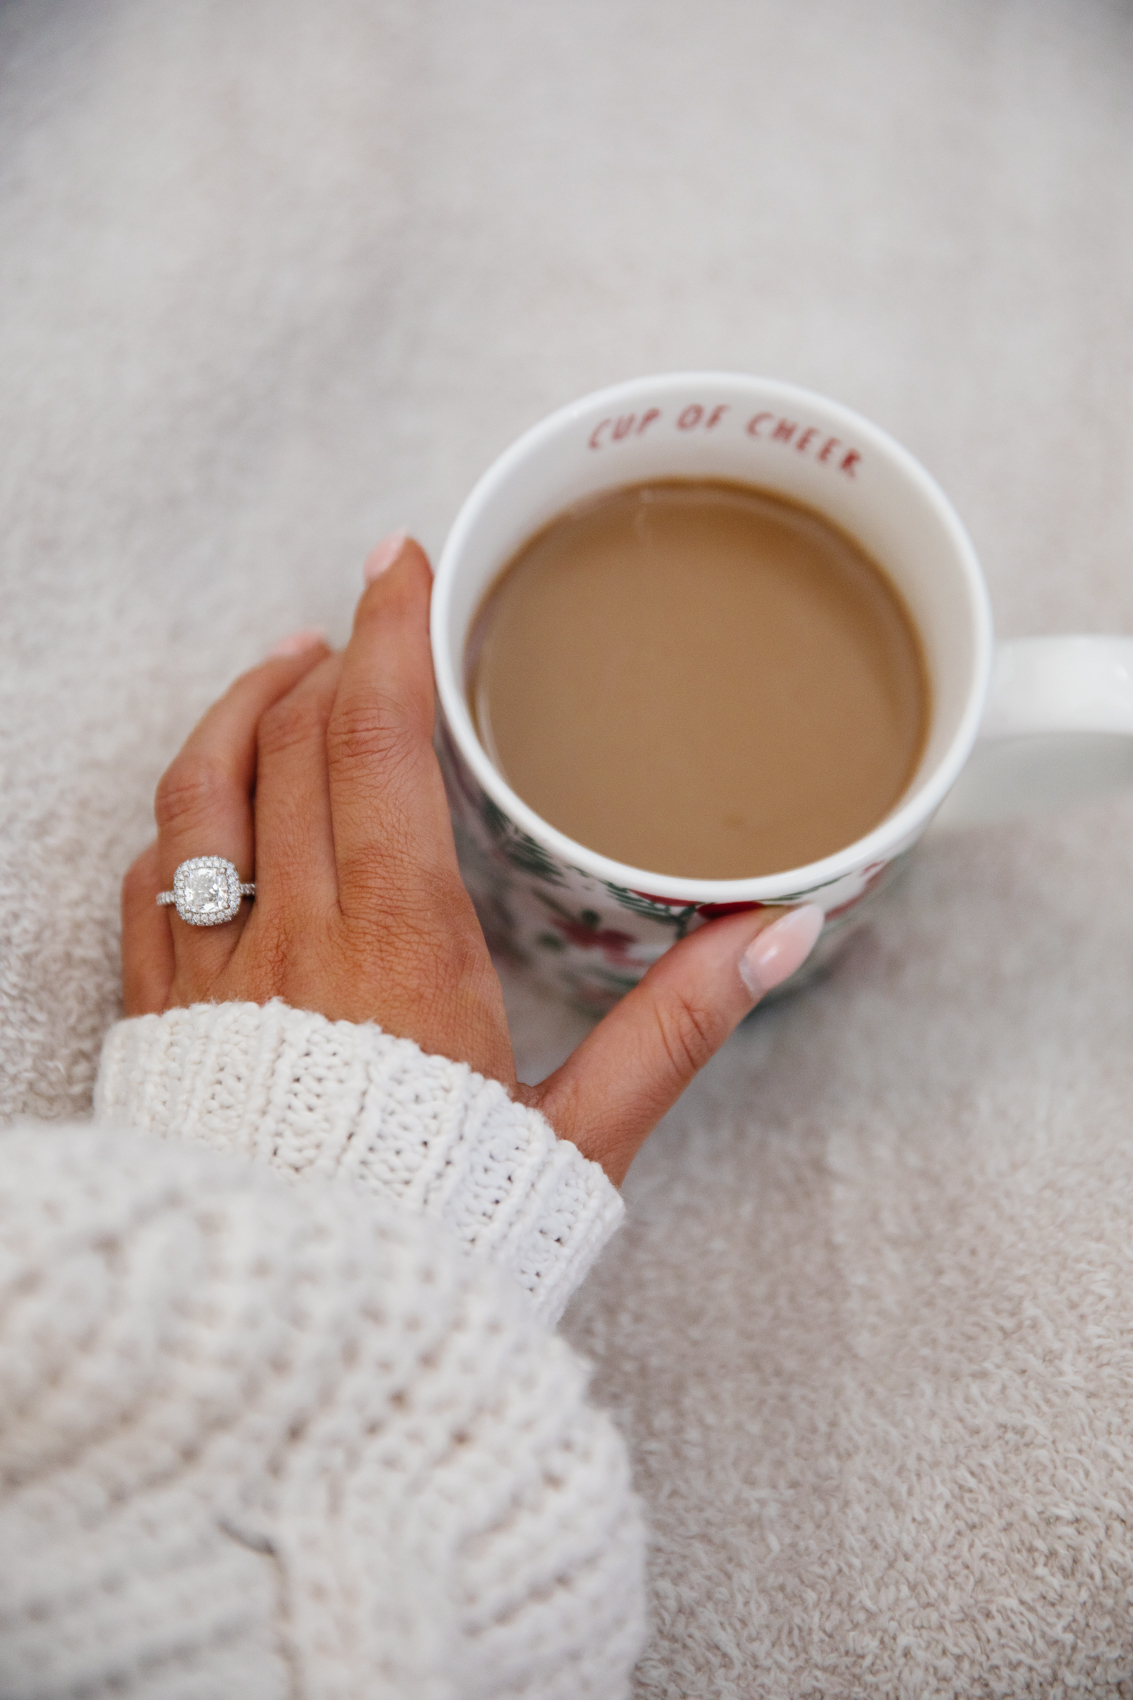 Cushion cut diamond engagement ring with a cup of coffee by James Allen